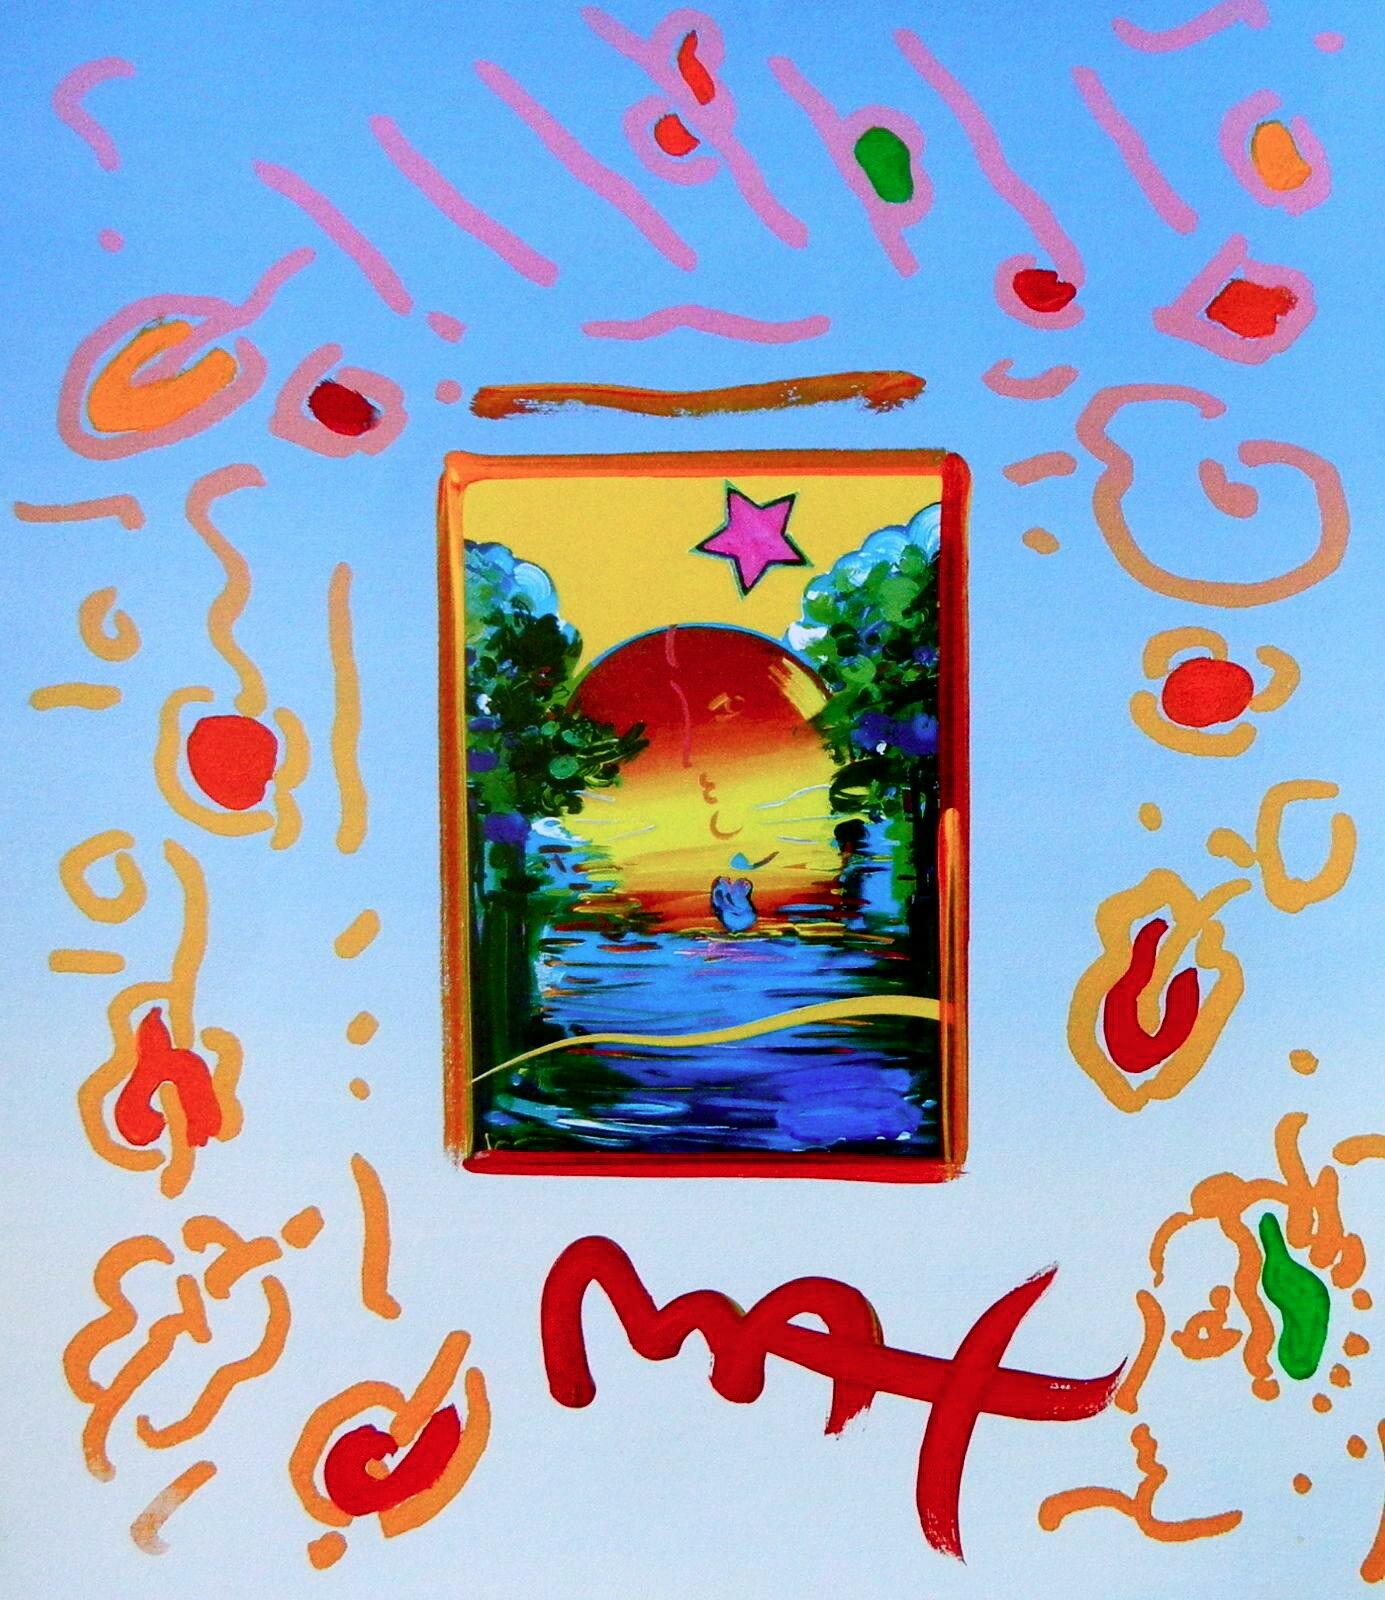 PETER MAX (1937-  ) Peter Max has achieved huge success and world-wide recognition for his artistic accomplishments as a multi-dimensional artist. From visionary Pop artist of the 1960s, to master of dynamic Neo Expressionism, his vibrant colors